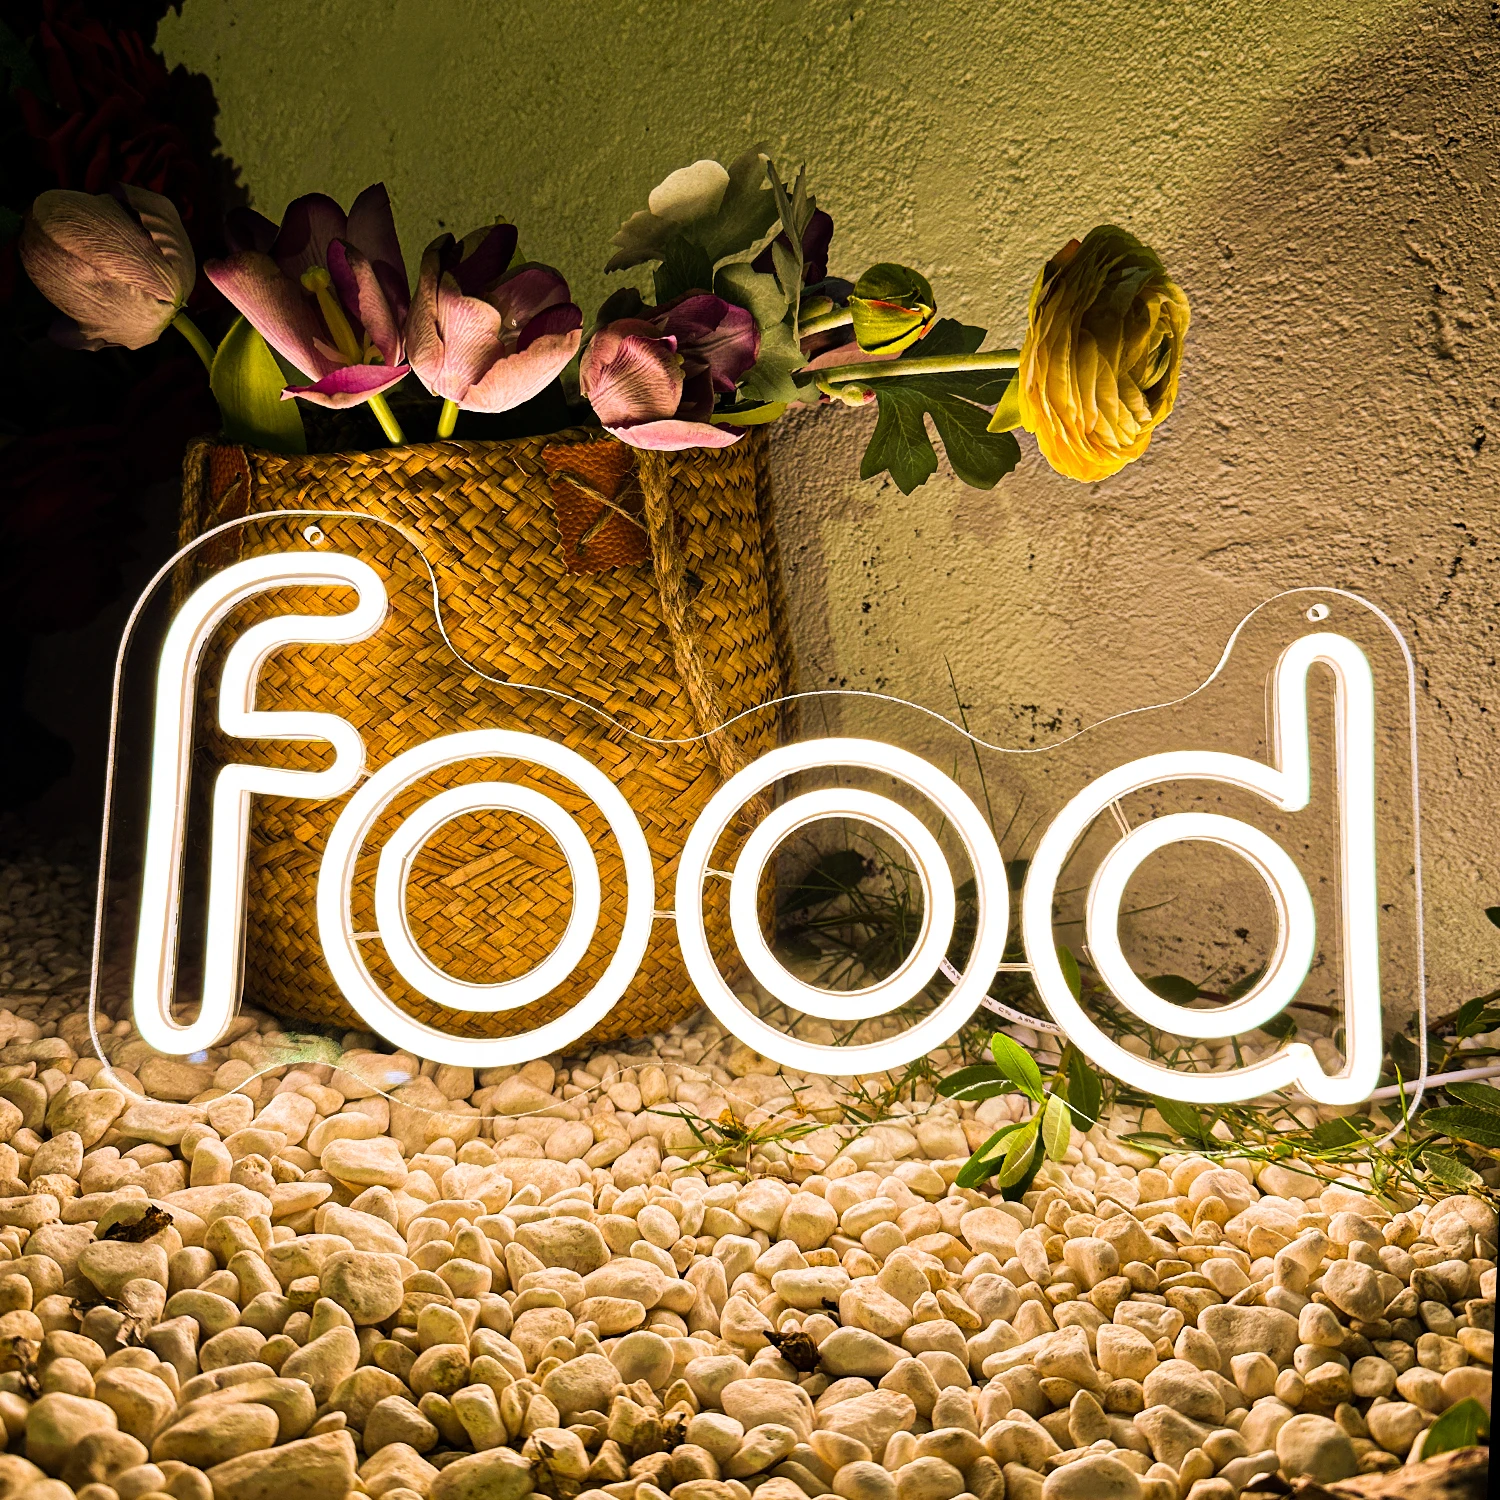 FOOD Neon sign LED light  Shop Home Art For wall decoration Led light room party ART personalized Restaurant Kitchen Neon signs